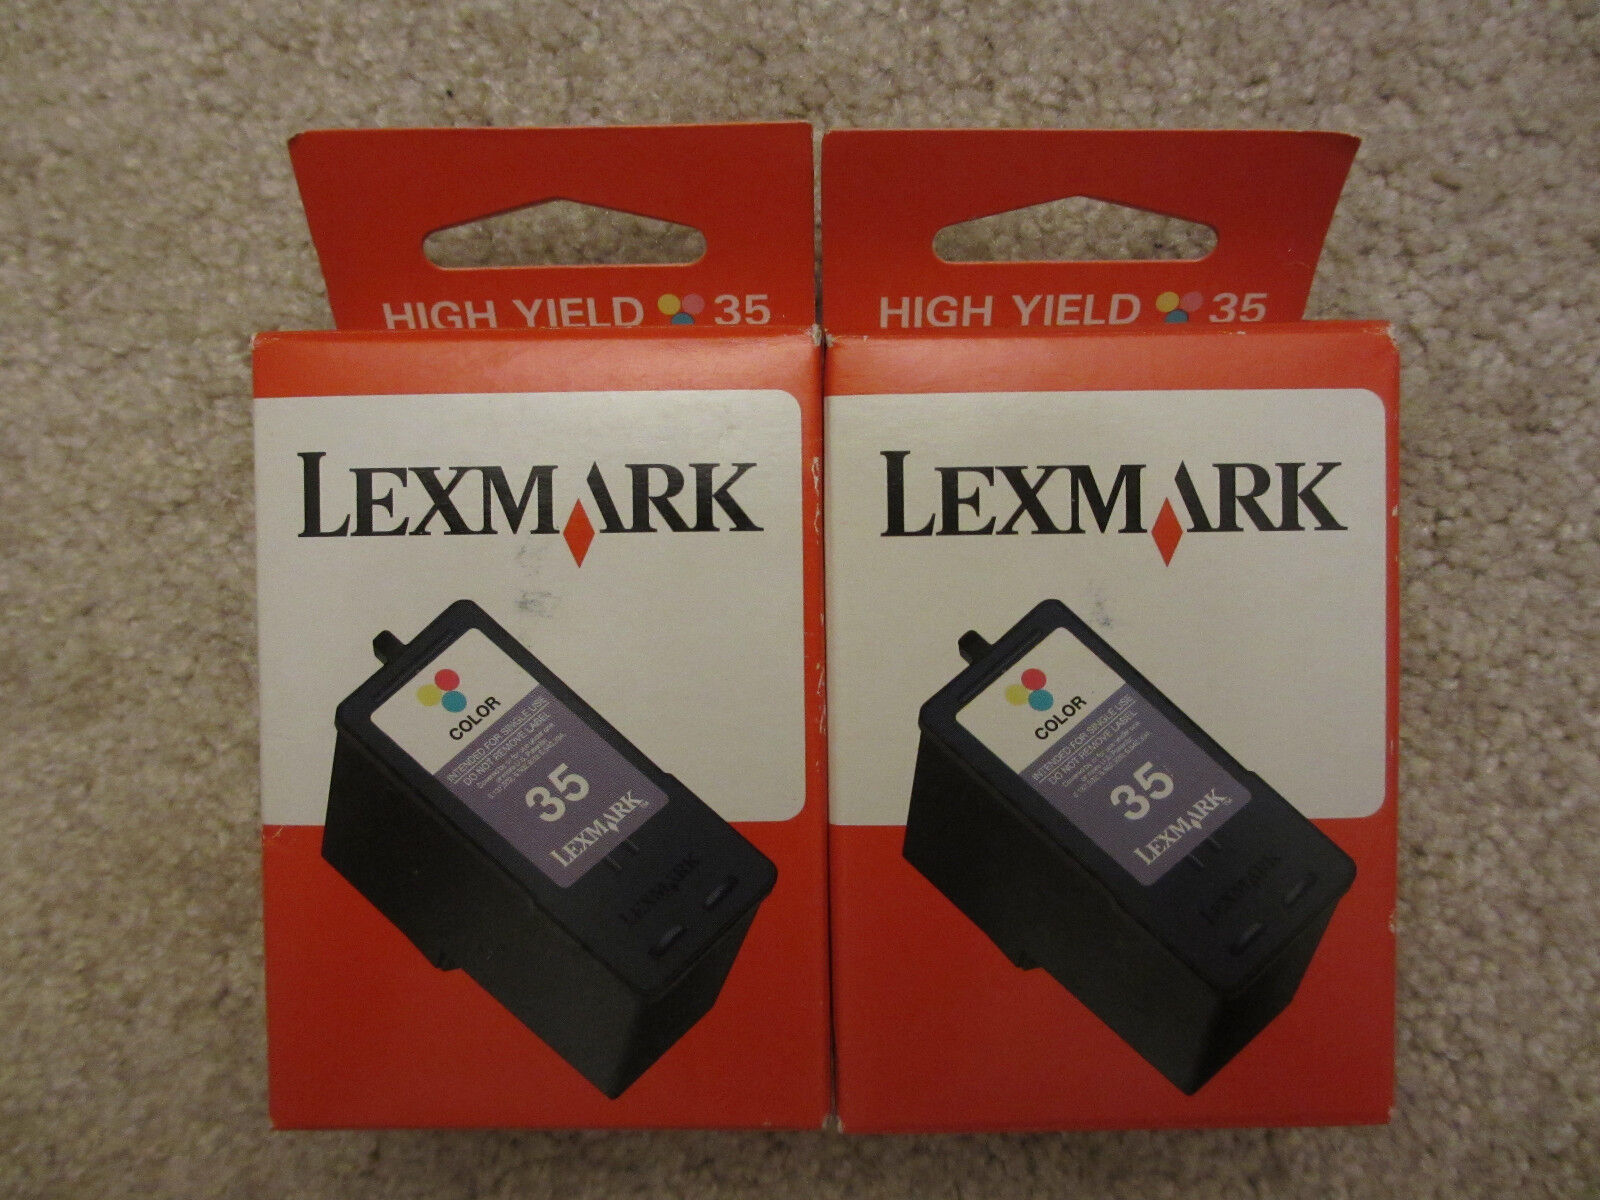 Lot of 2 - NEW GENUINE LEXMARK 18C0035A 35 High Yield Tri-Color Ink Cartridges